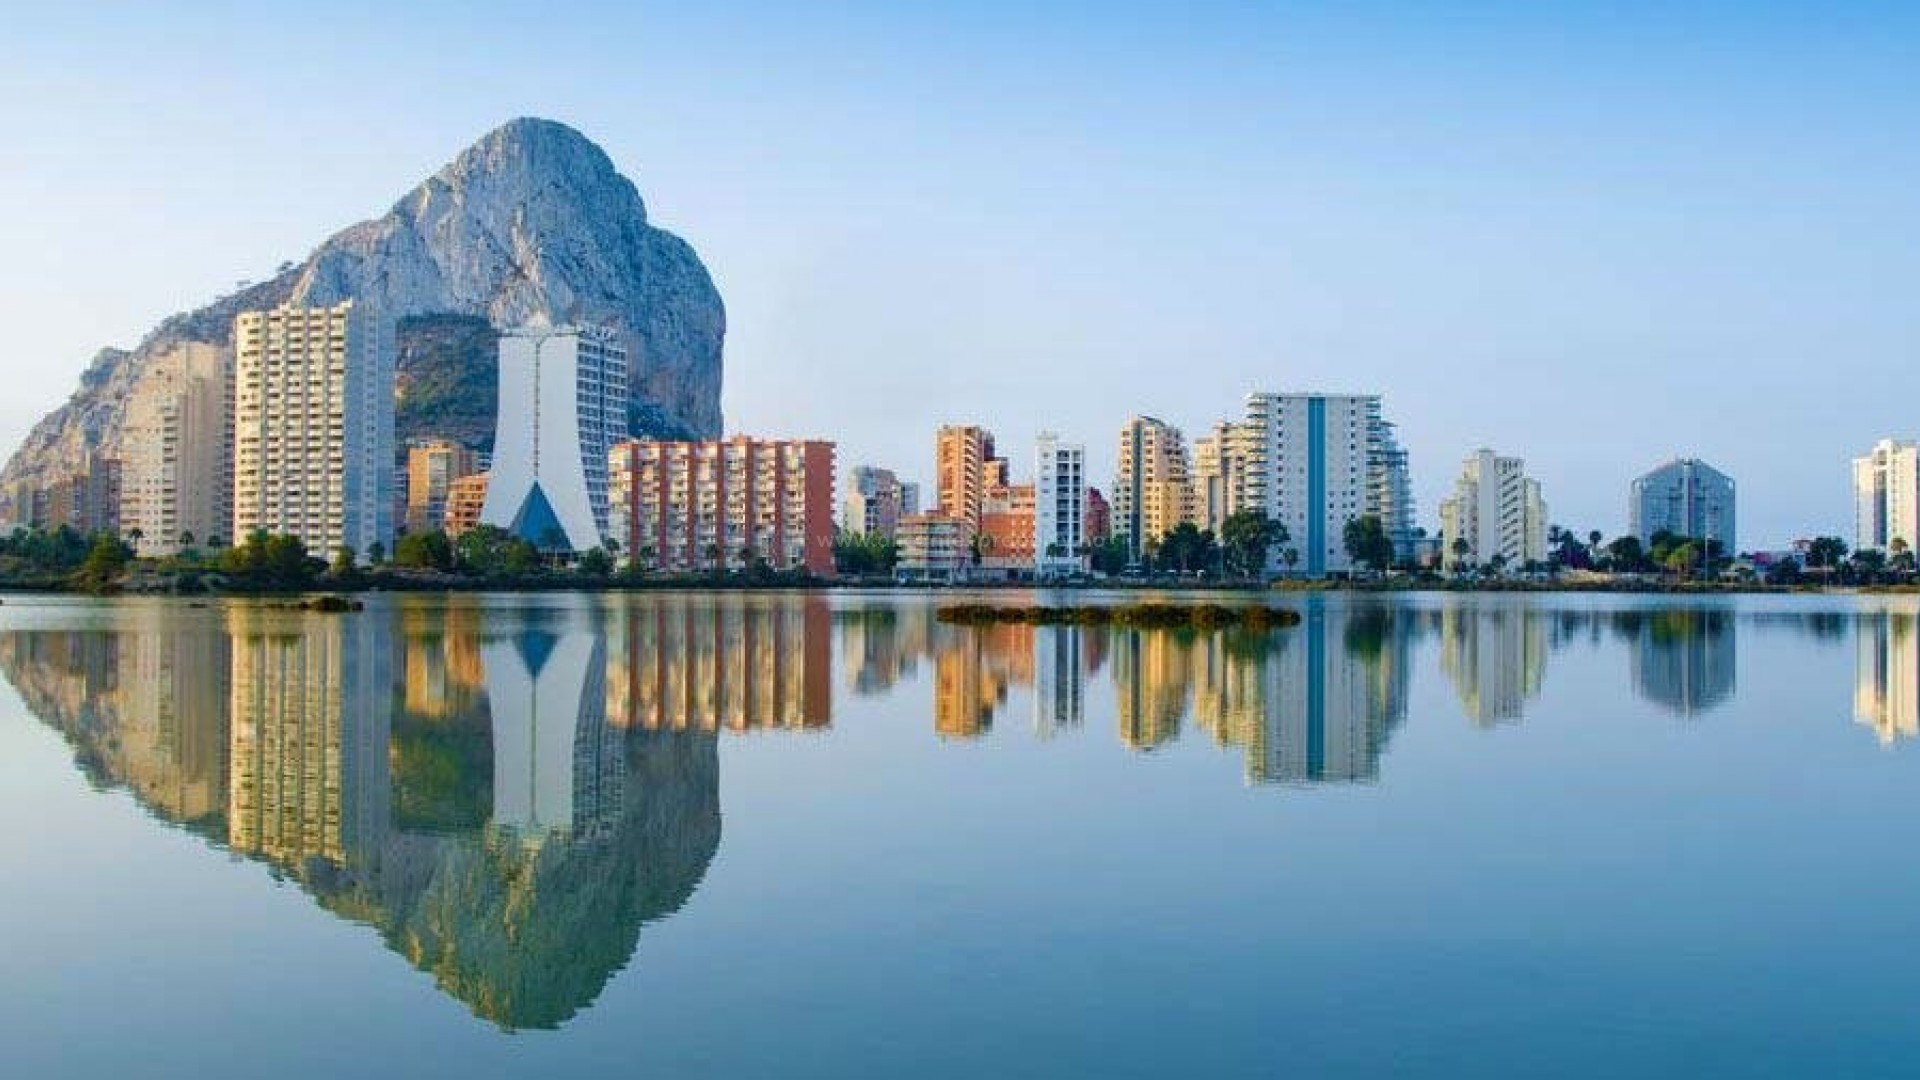 New luxury apartments in Calpe with sea views, 1/2/3 bedrooms, large terraces, infinity pool, sauna, gym and relaxation area with sea views.